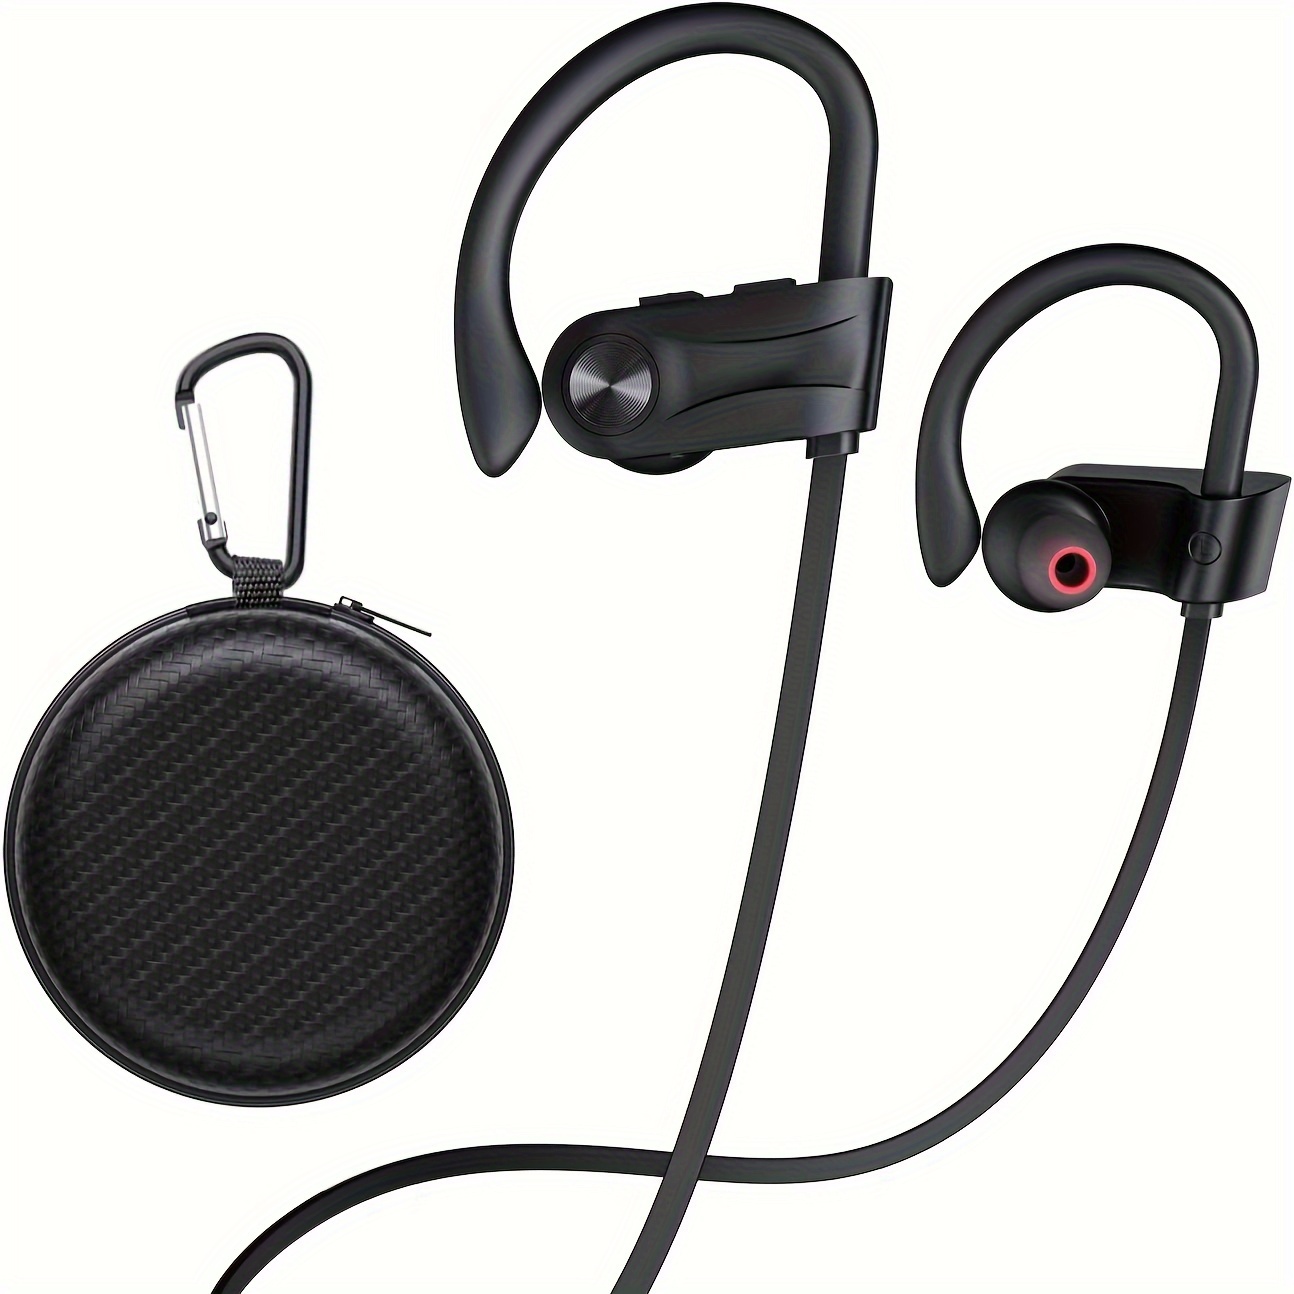 

Wireless Headphones 5.3 Headphones With Earhooks, 16hrs Playtime Stereo Bass Headsets With Mic Running Headphones, Black